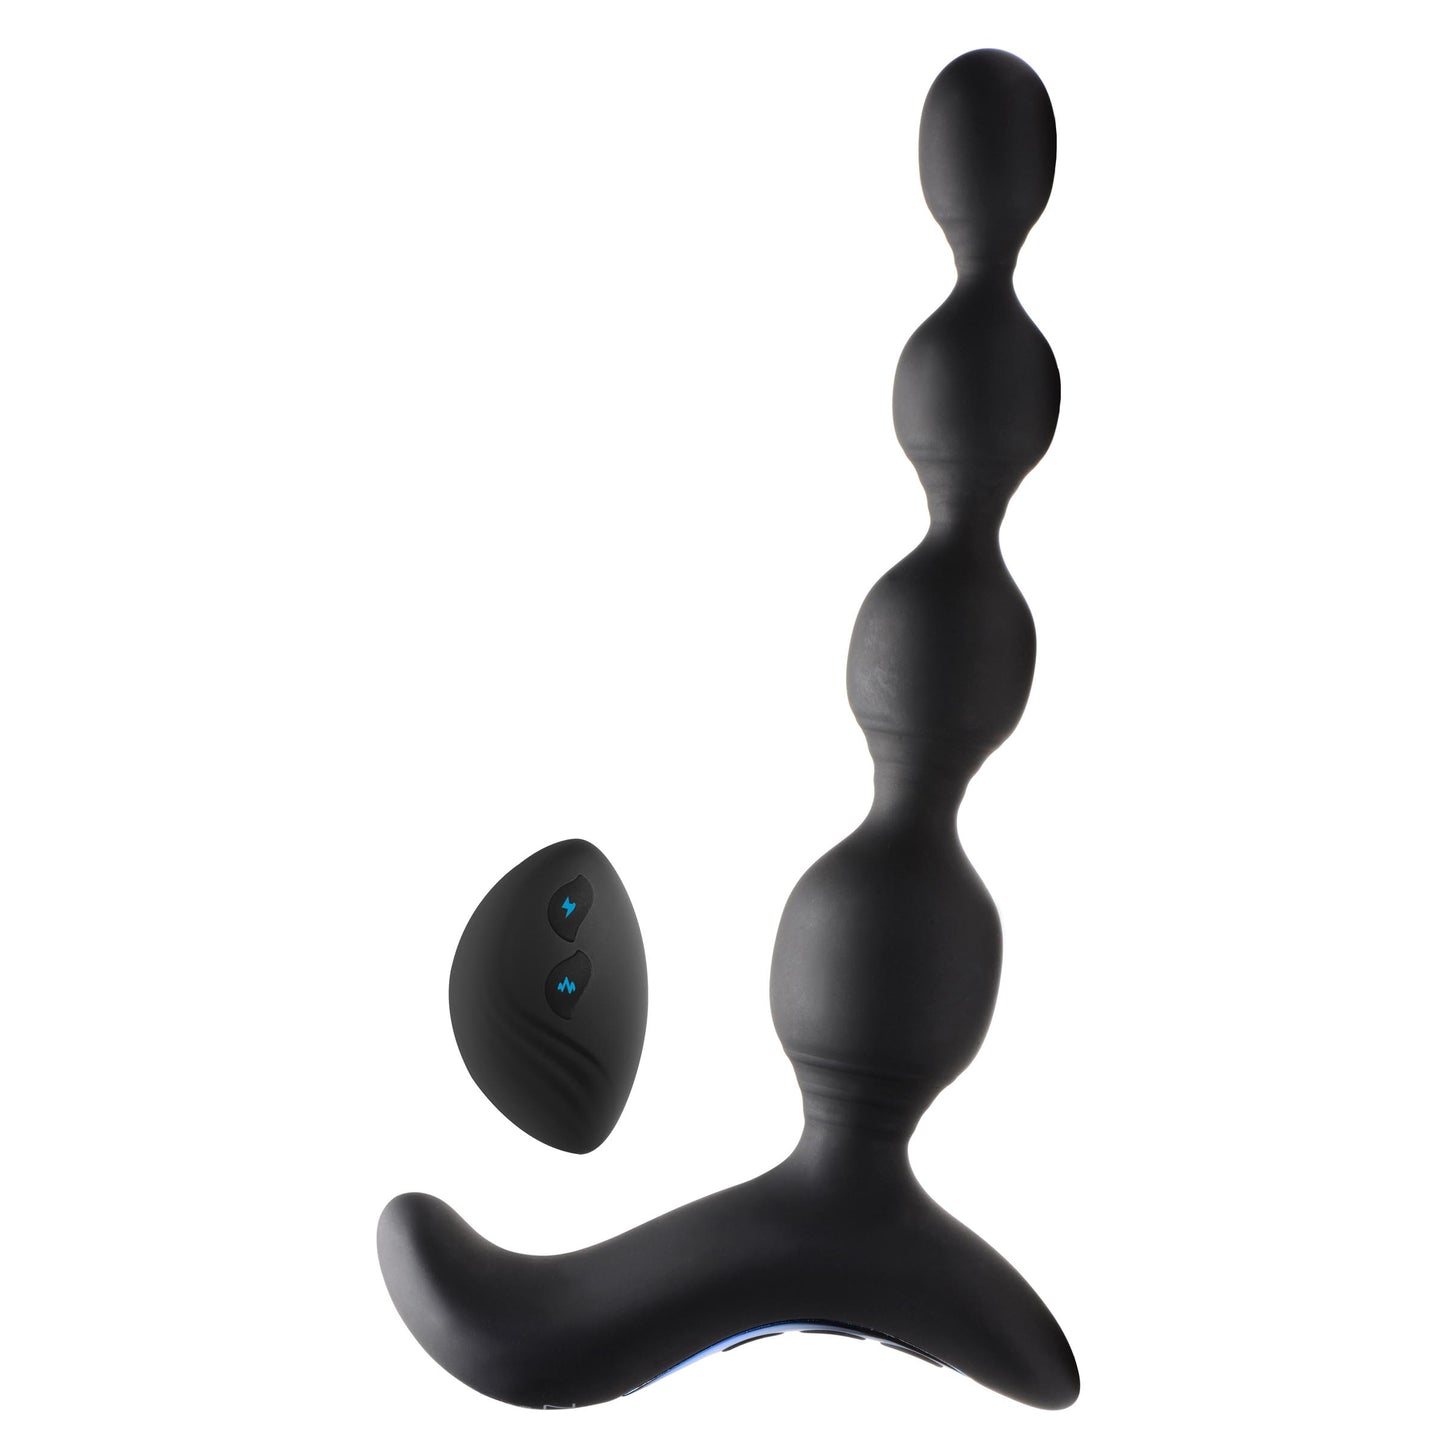 Shock-beads 80x Vibrating & E-stim Silicone Anal Beads With Remote